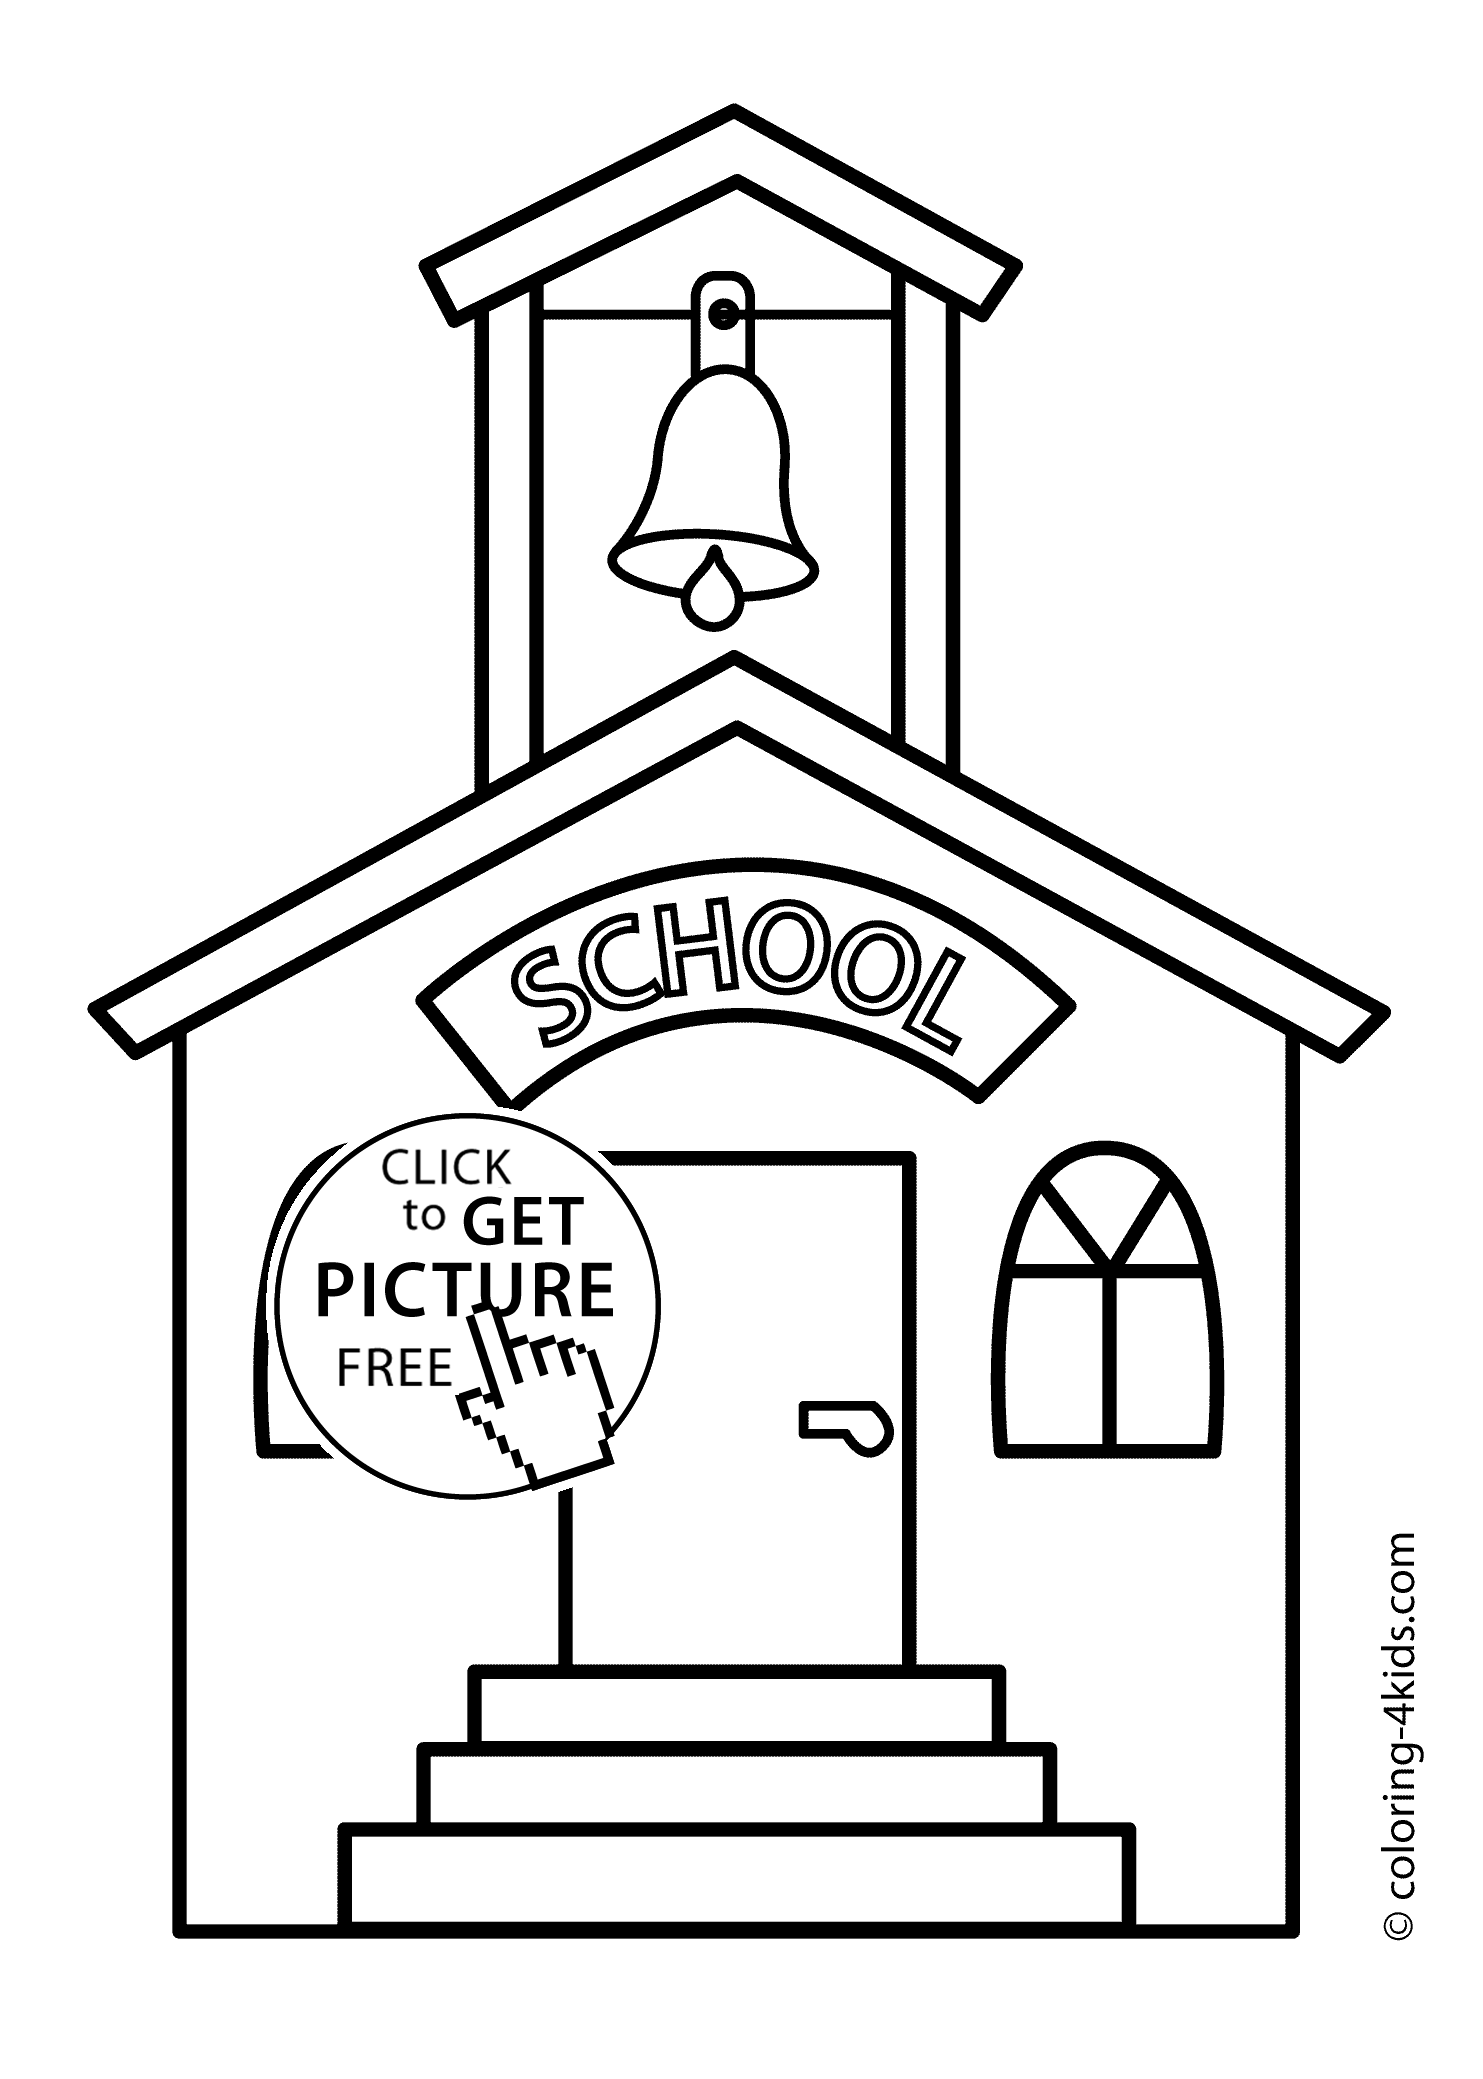 School building coloring page, classes coloring page for